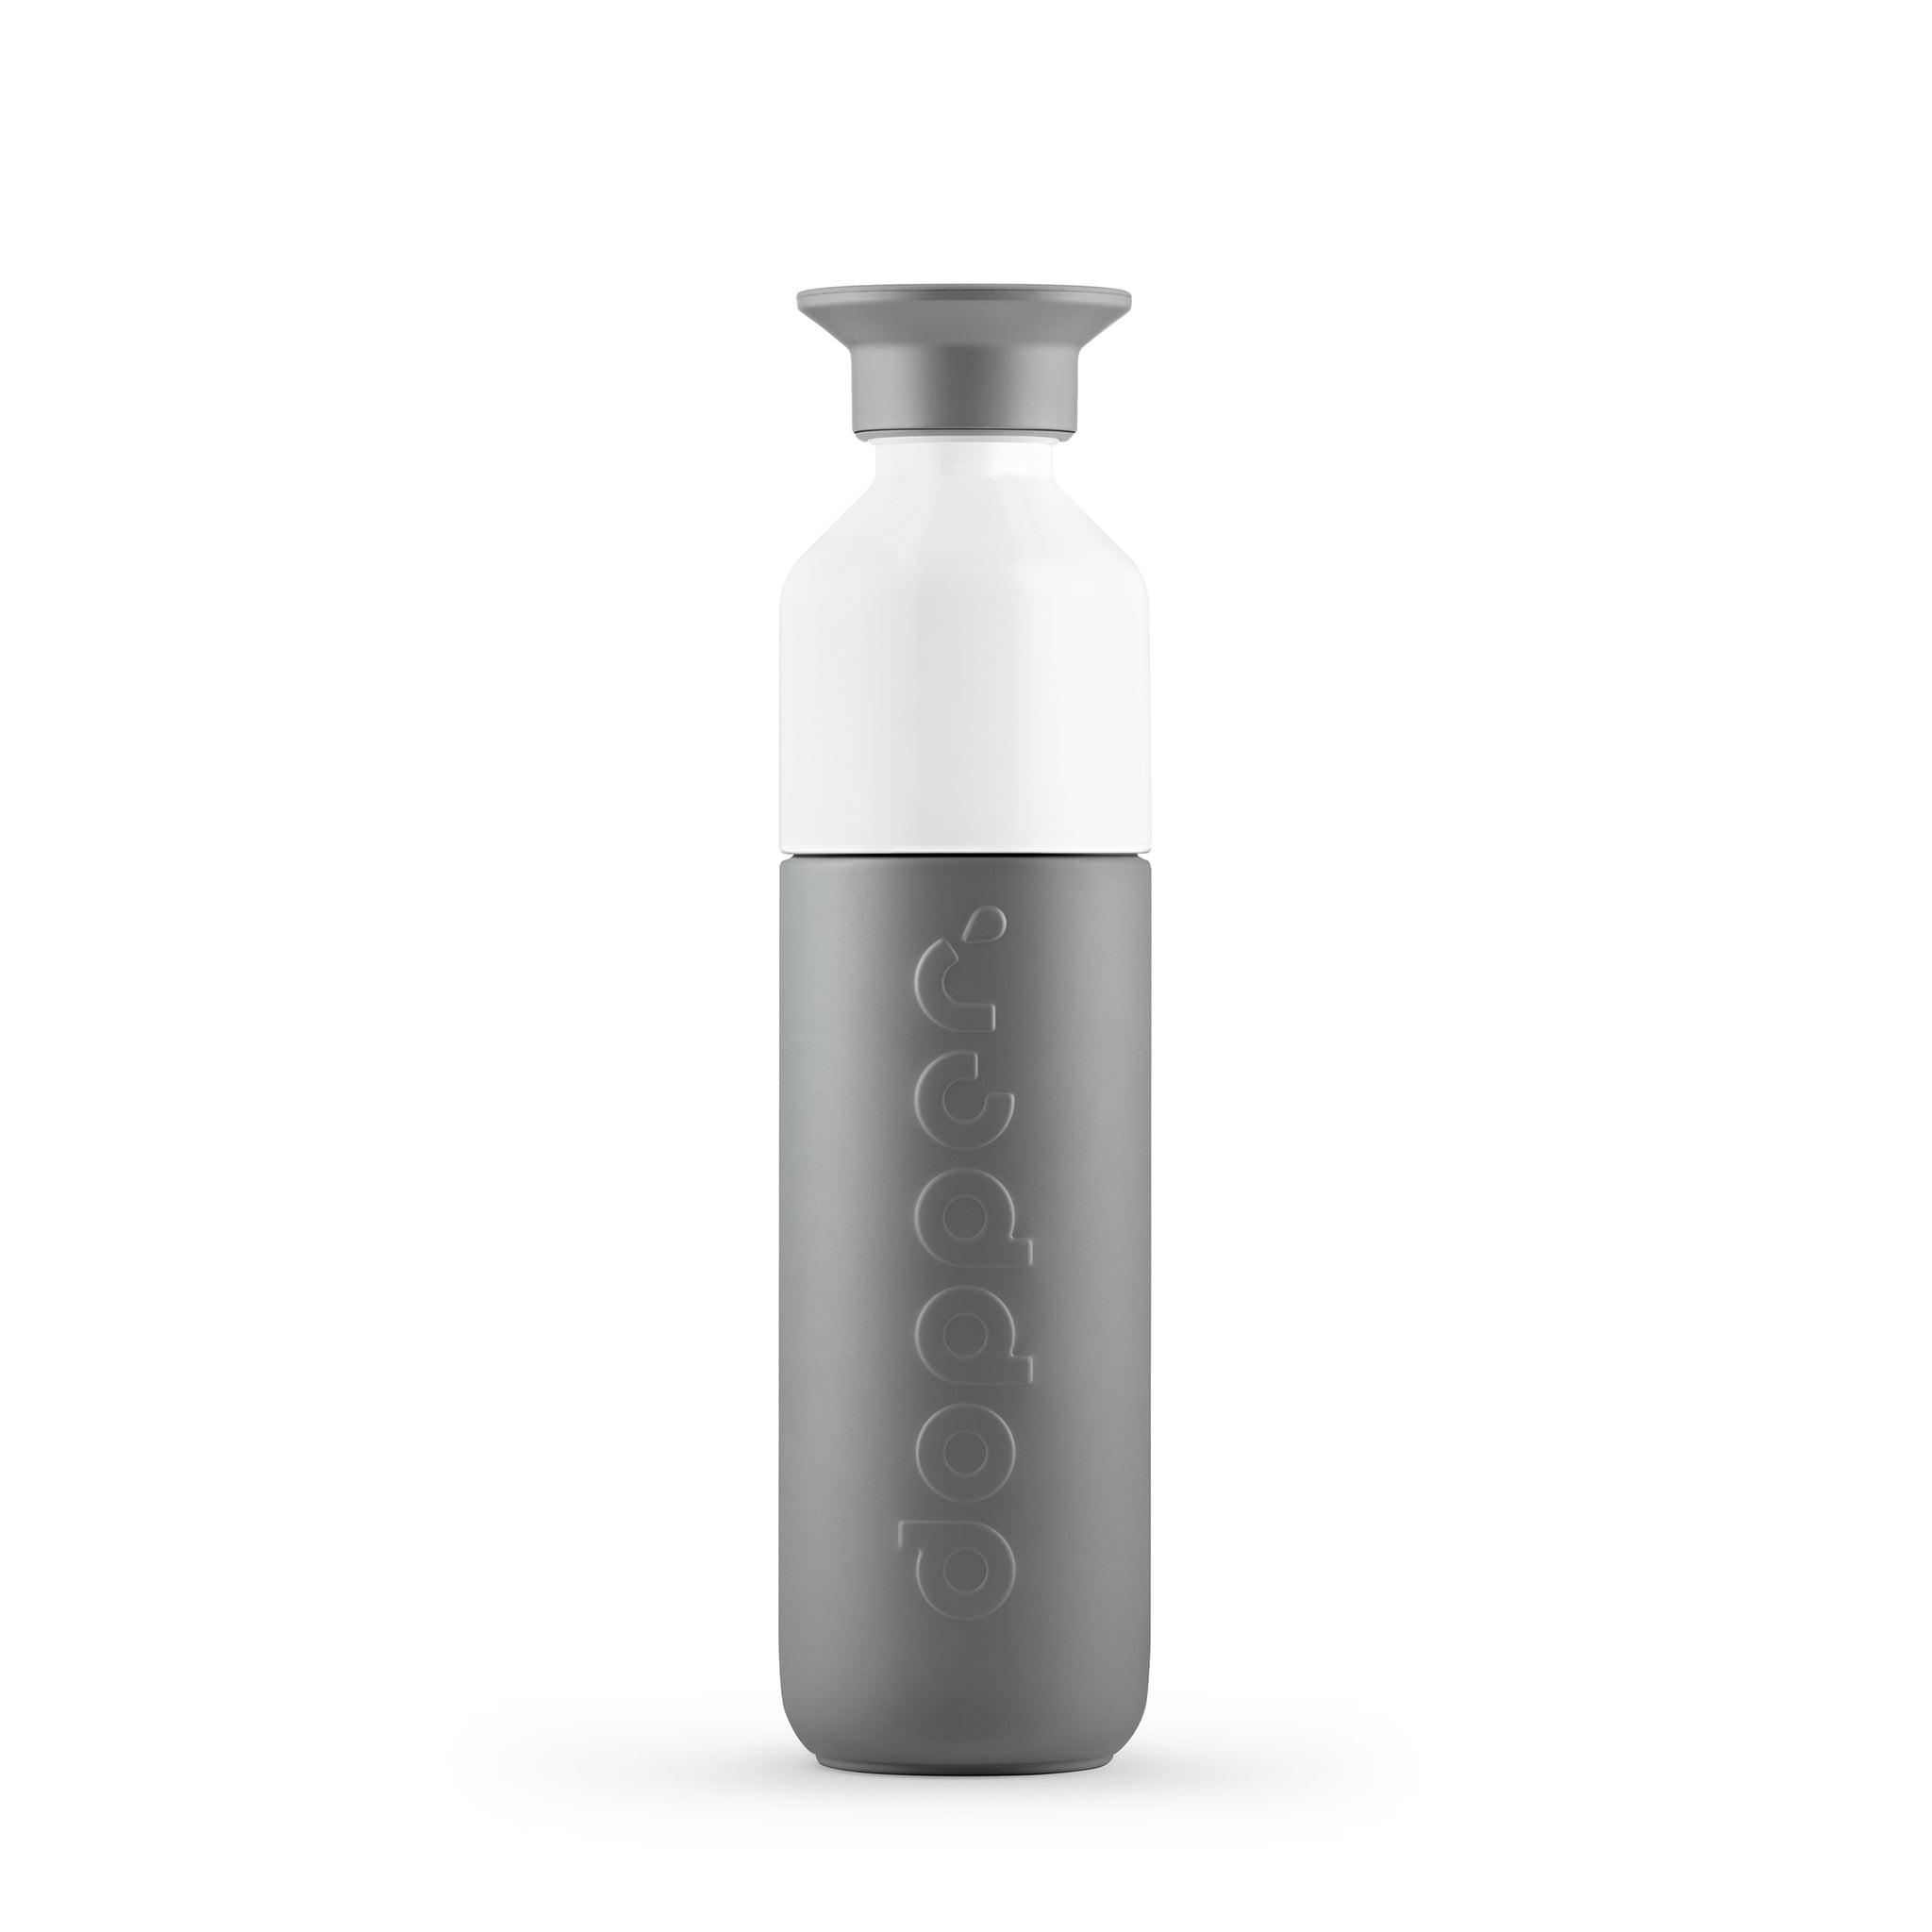 Doppre Insulated Small Glacier Grey│Thermosfles 350ml│art. 1557│voorkant met witte achtergrond